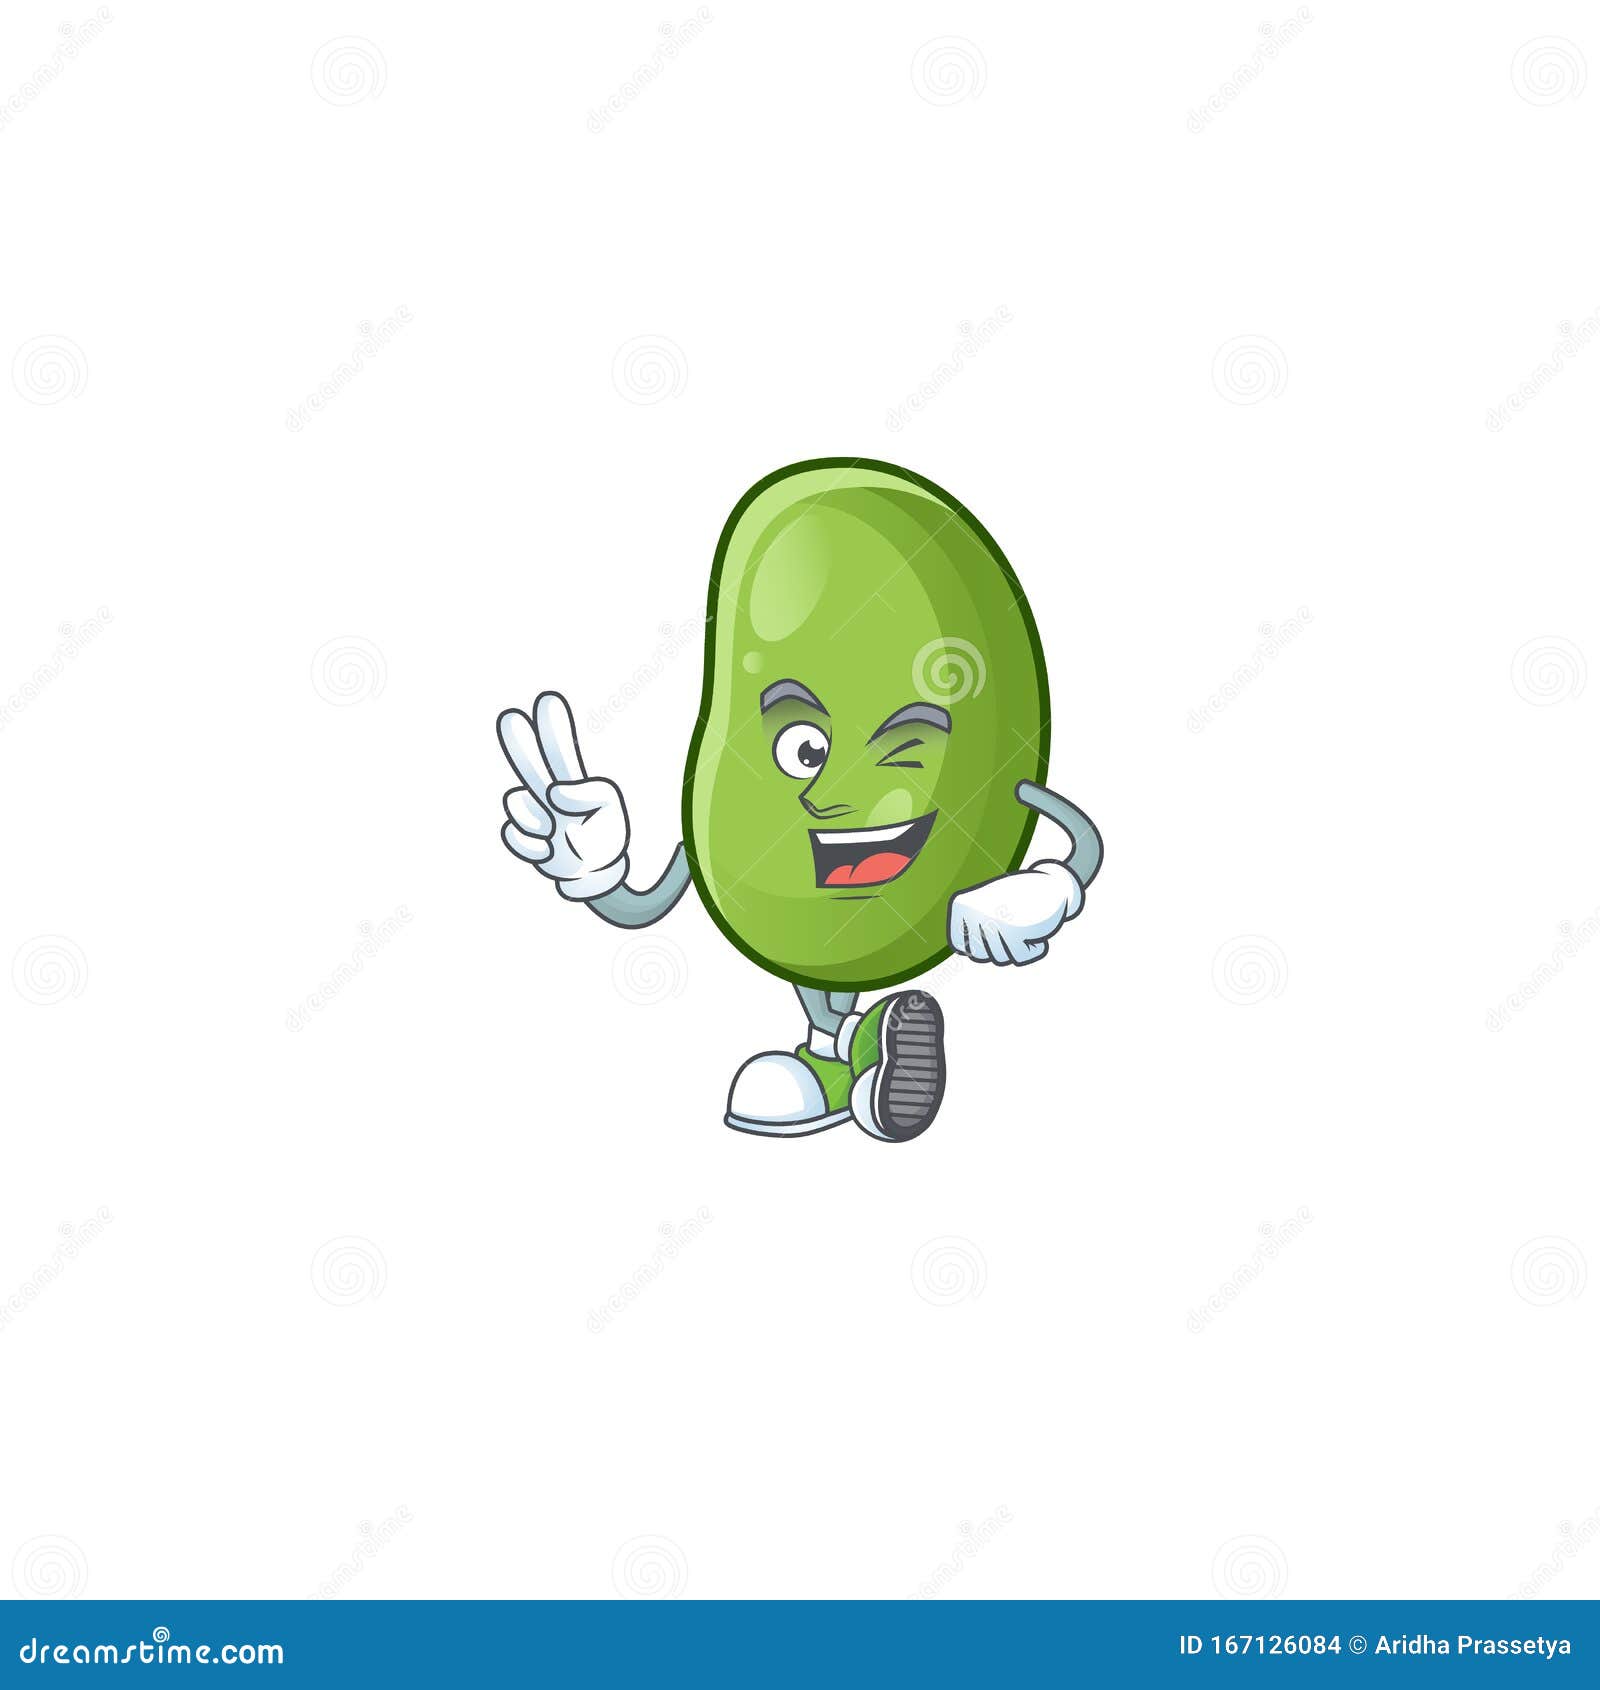 Green Beans Cartoon Mascot Style with Two Fingers Stock Vector ...